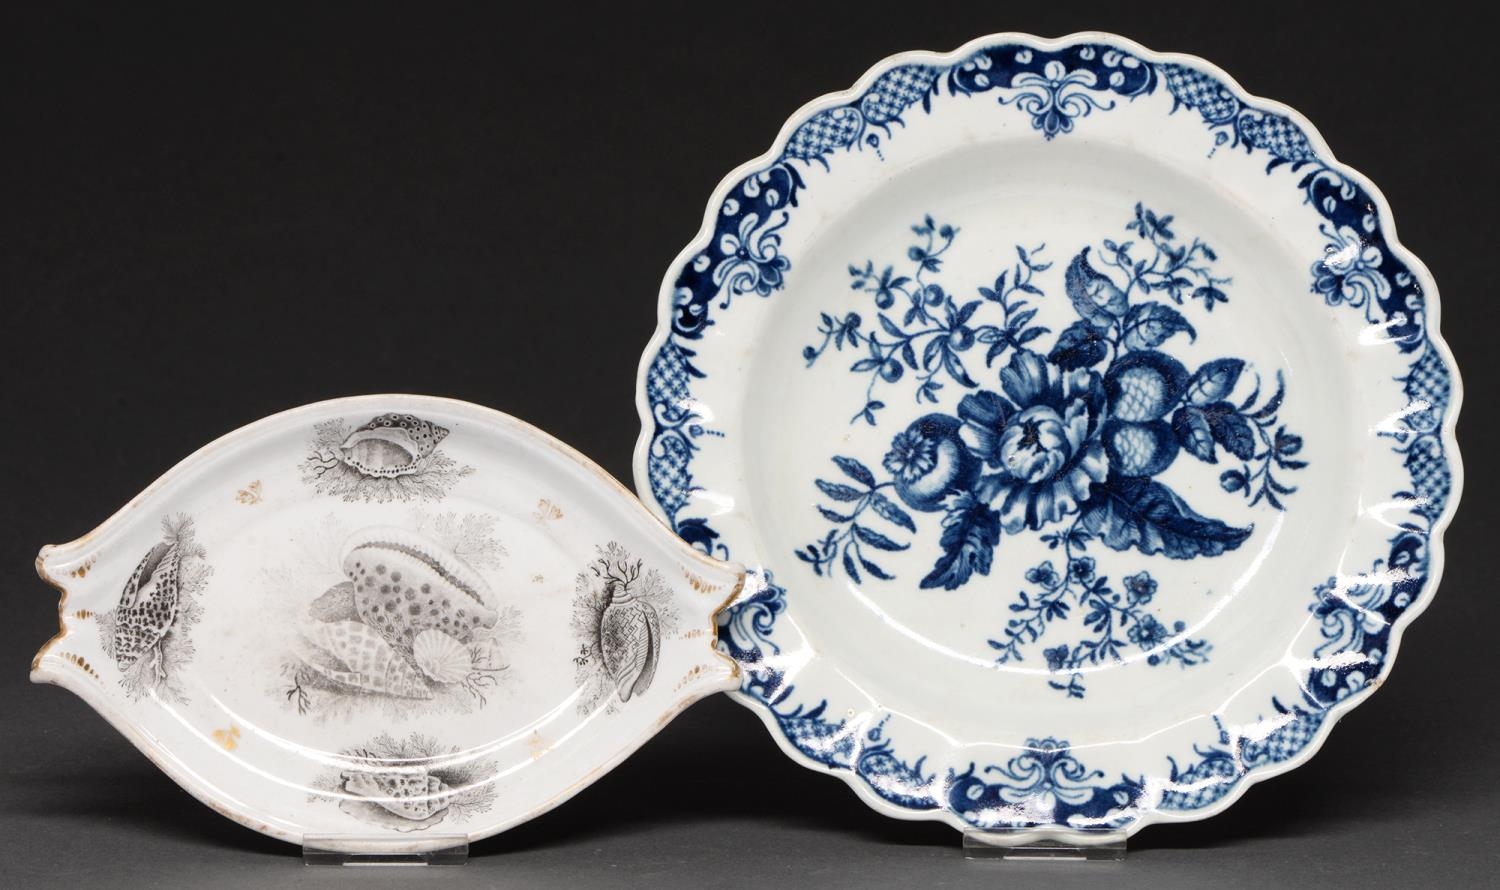 A Worcester blue and white plate, c1785, transfer printed in underglaze blue with the Pinecone